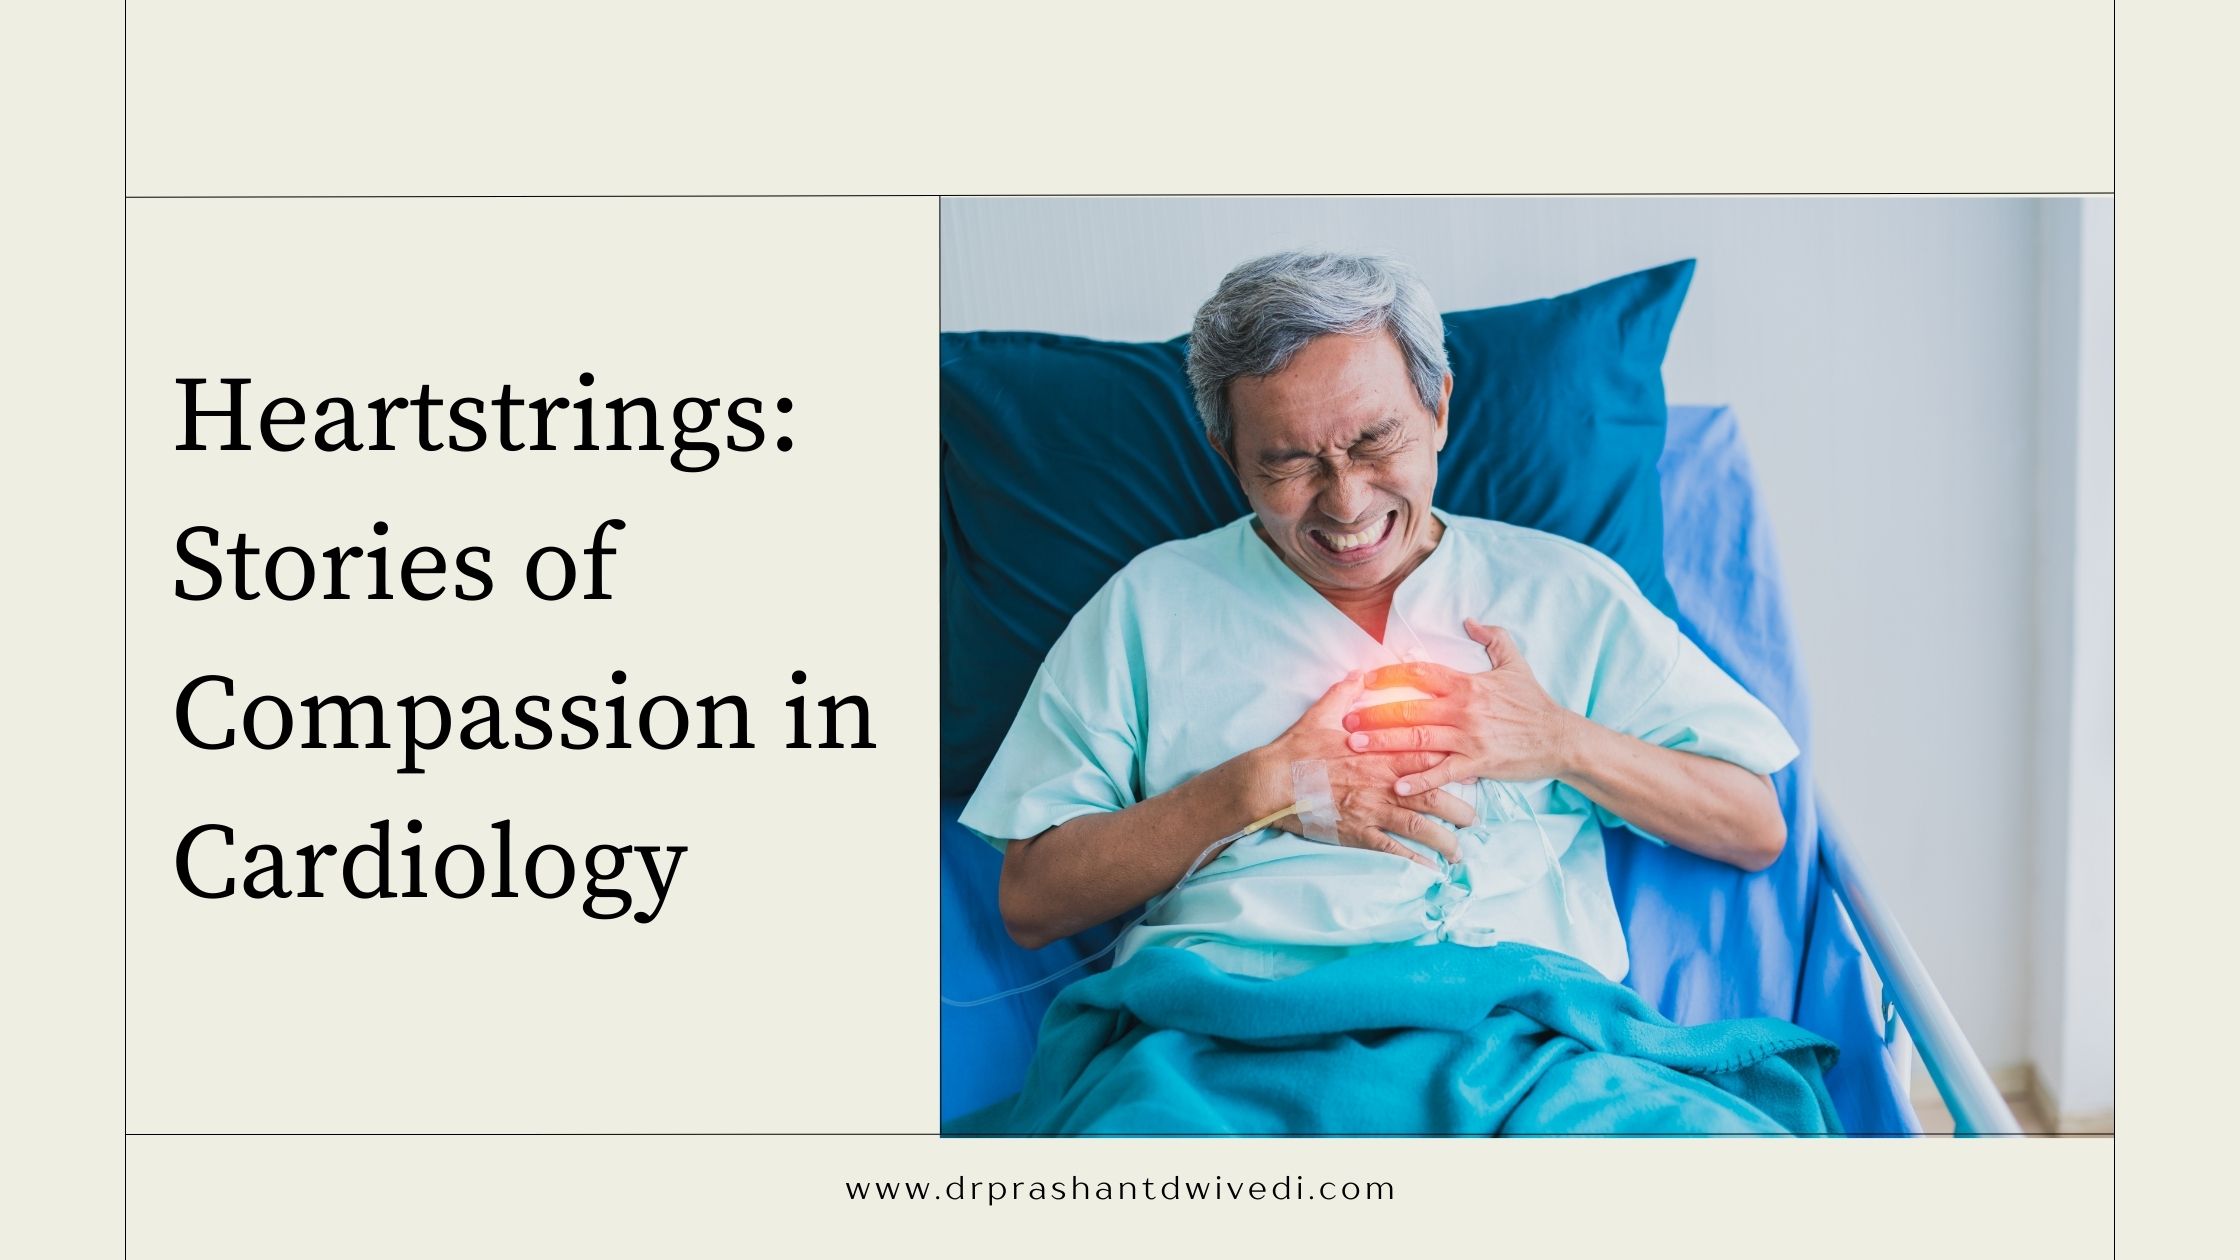 Heartstrings: Stories of Compassion in Cardiology